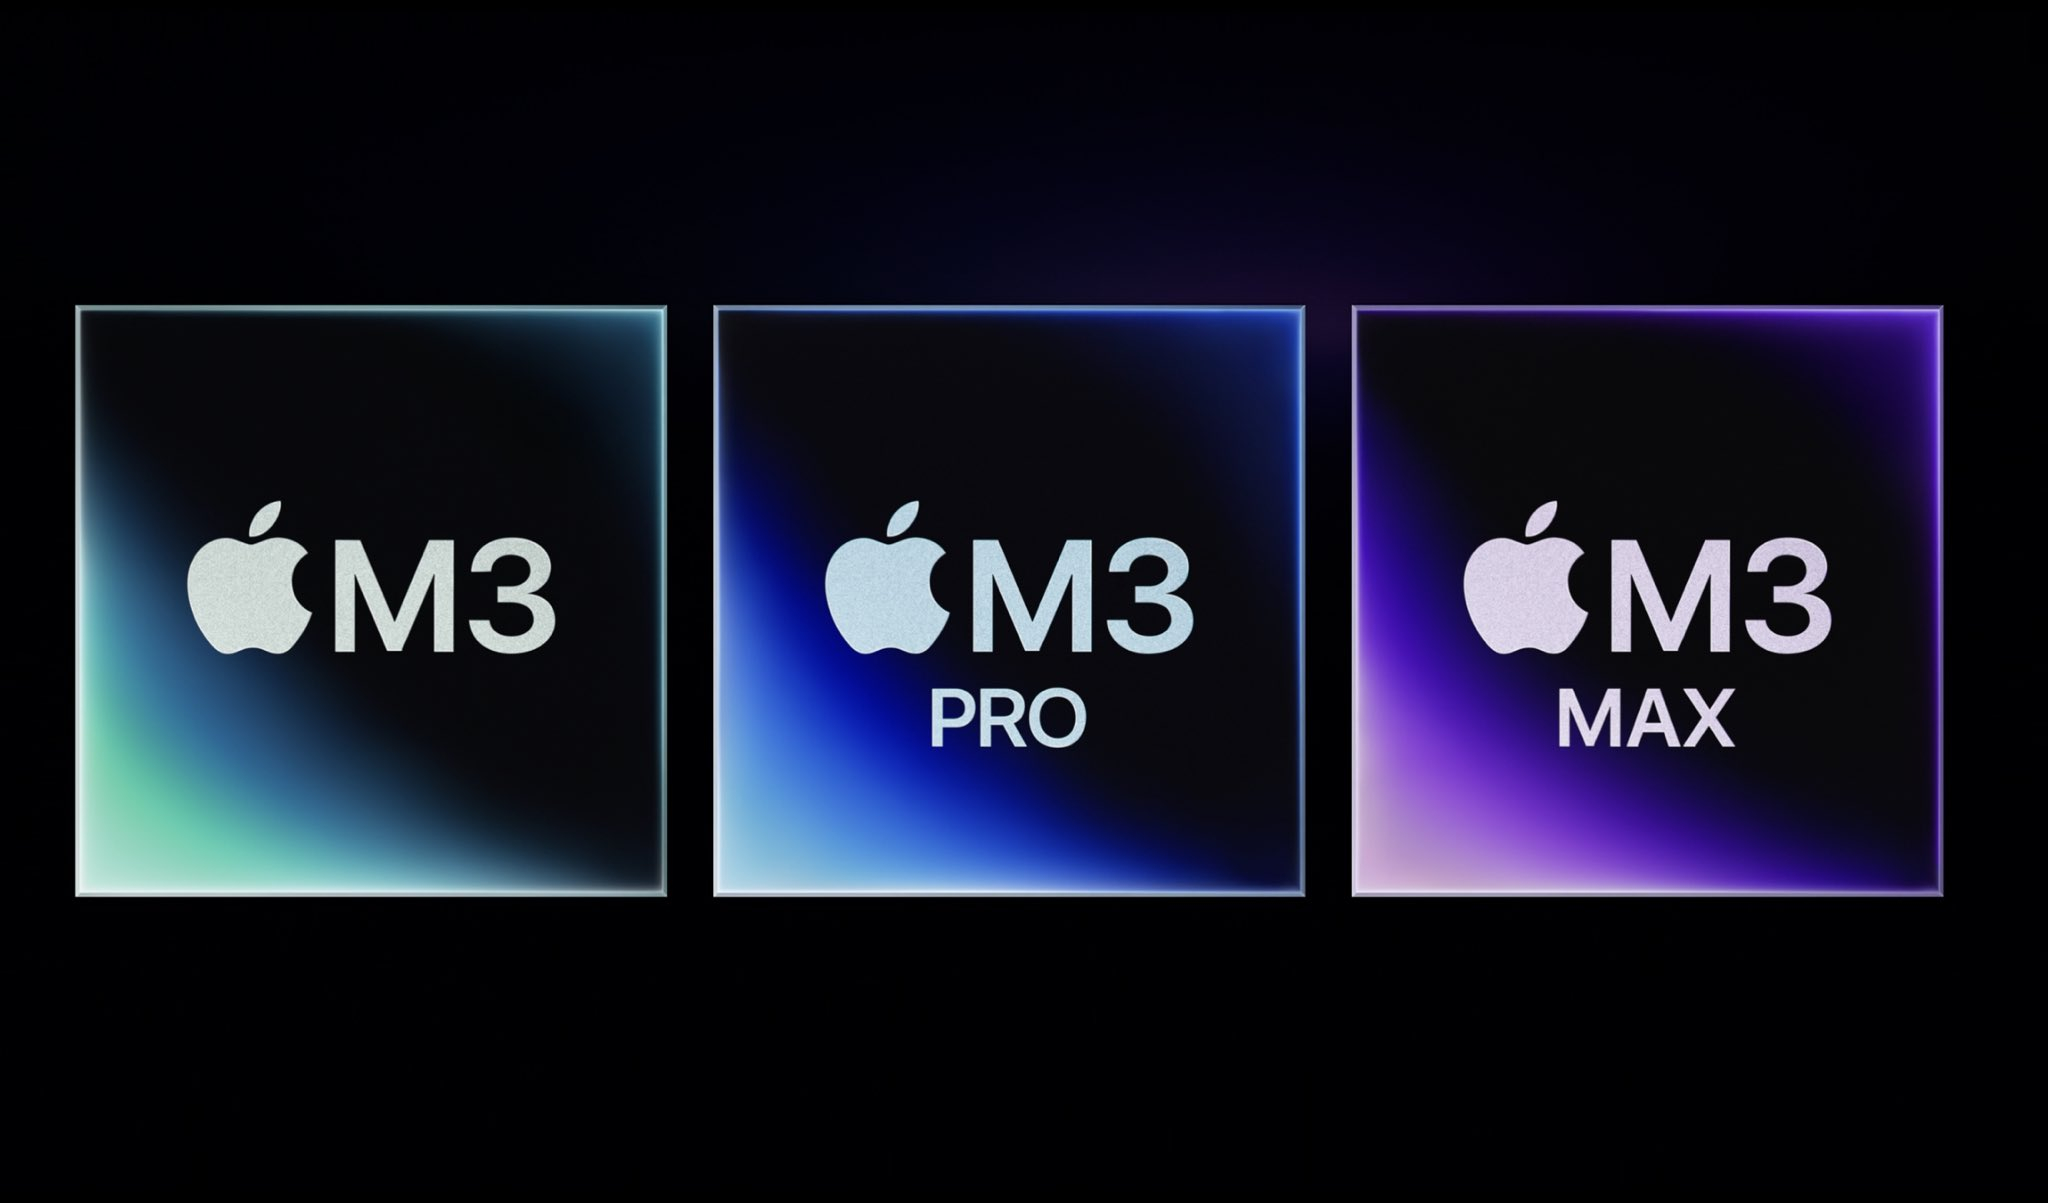 M3 Pro and M3 Max Pro Multi-Display Guide